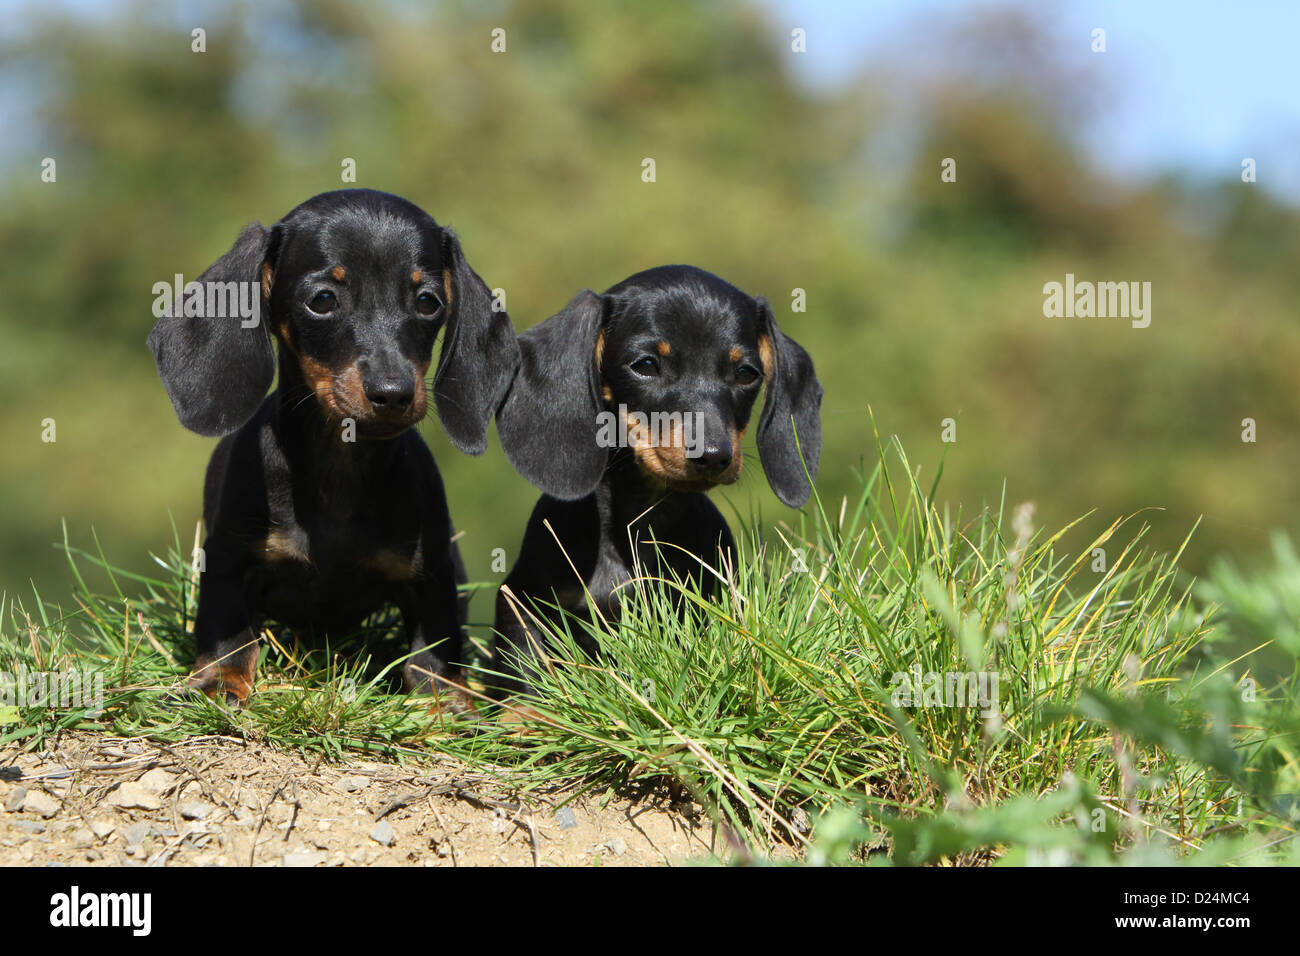 Dog Dachshund /  Dackel / Teckel  shorthaired two puppies (black and tan) sitting Stock Photo